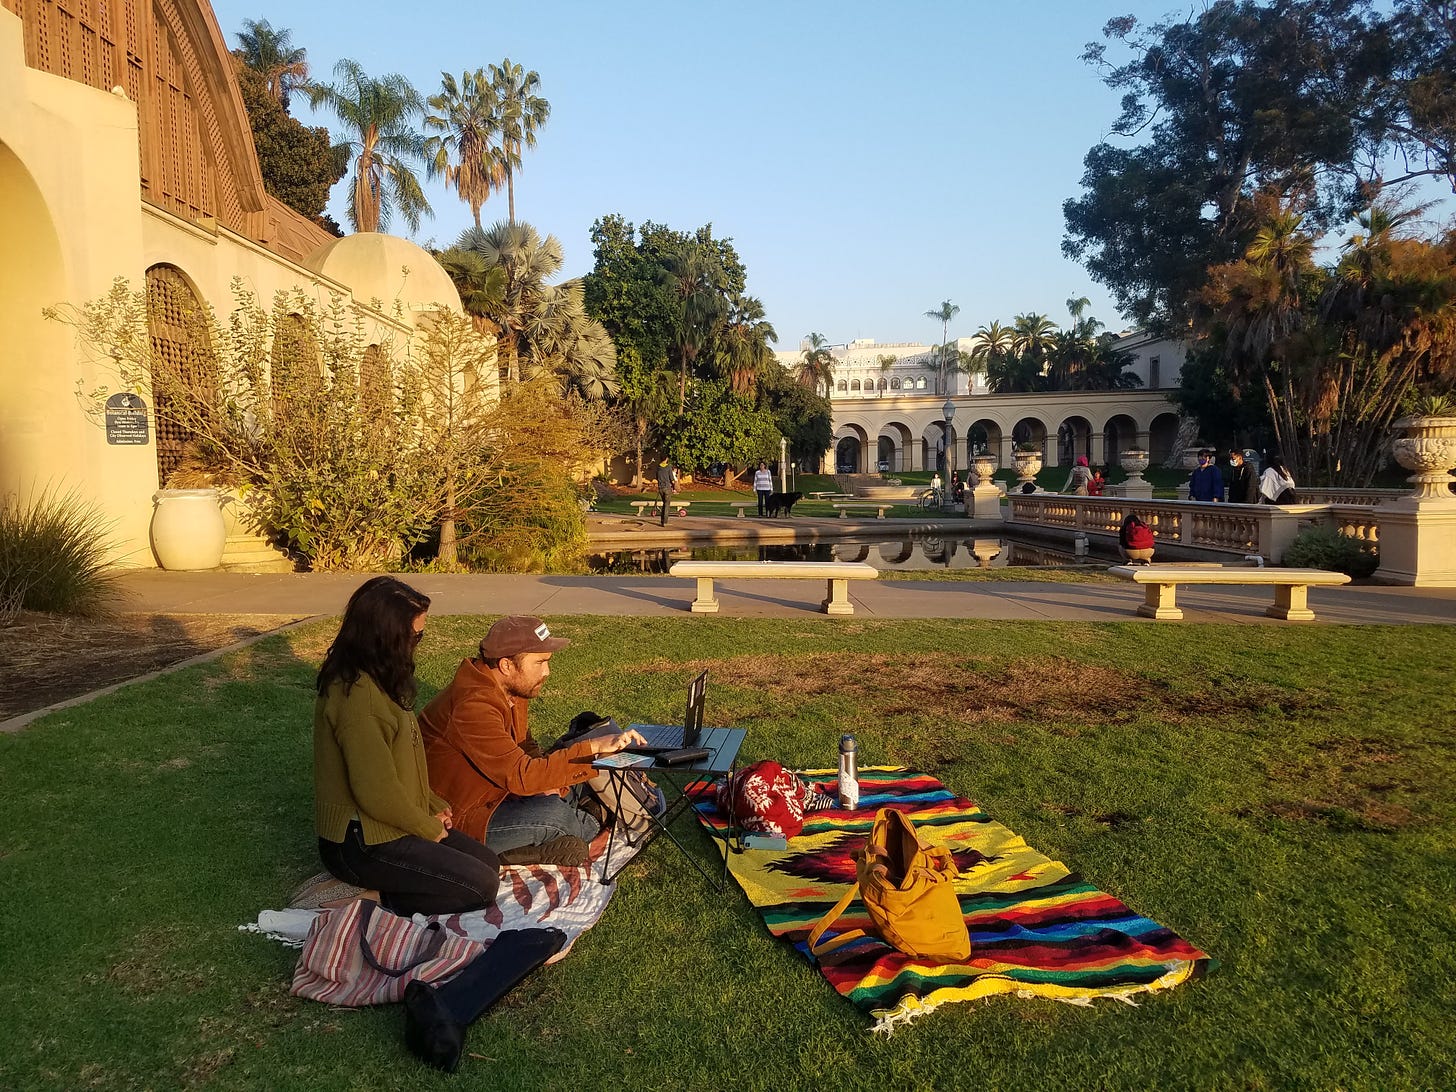 A woman and man, sister and brother, sit together on a blanket on a lawn. Behind them is a stately building and a pond, all illuminated in late afternoon golden light. The man is looking at a computer on a small table in front of them.